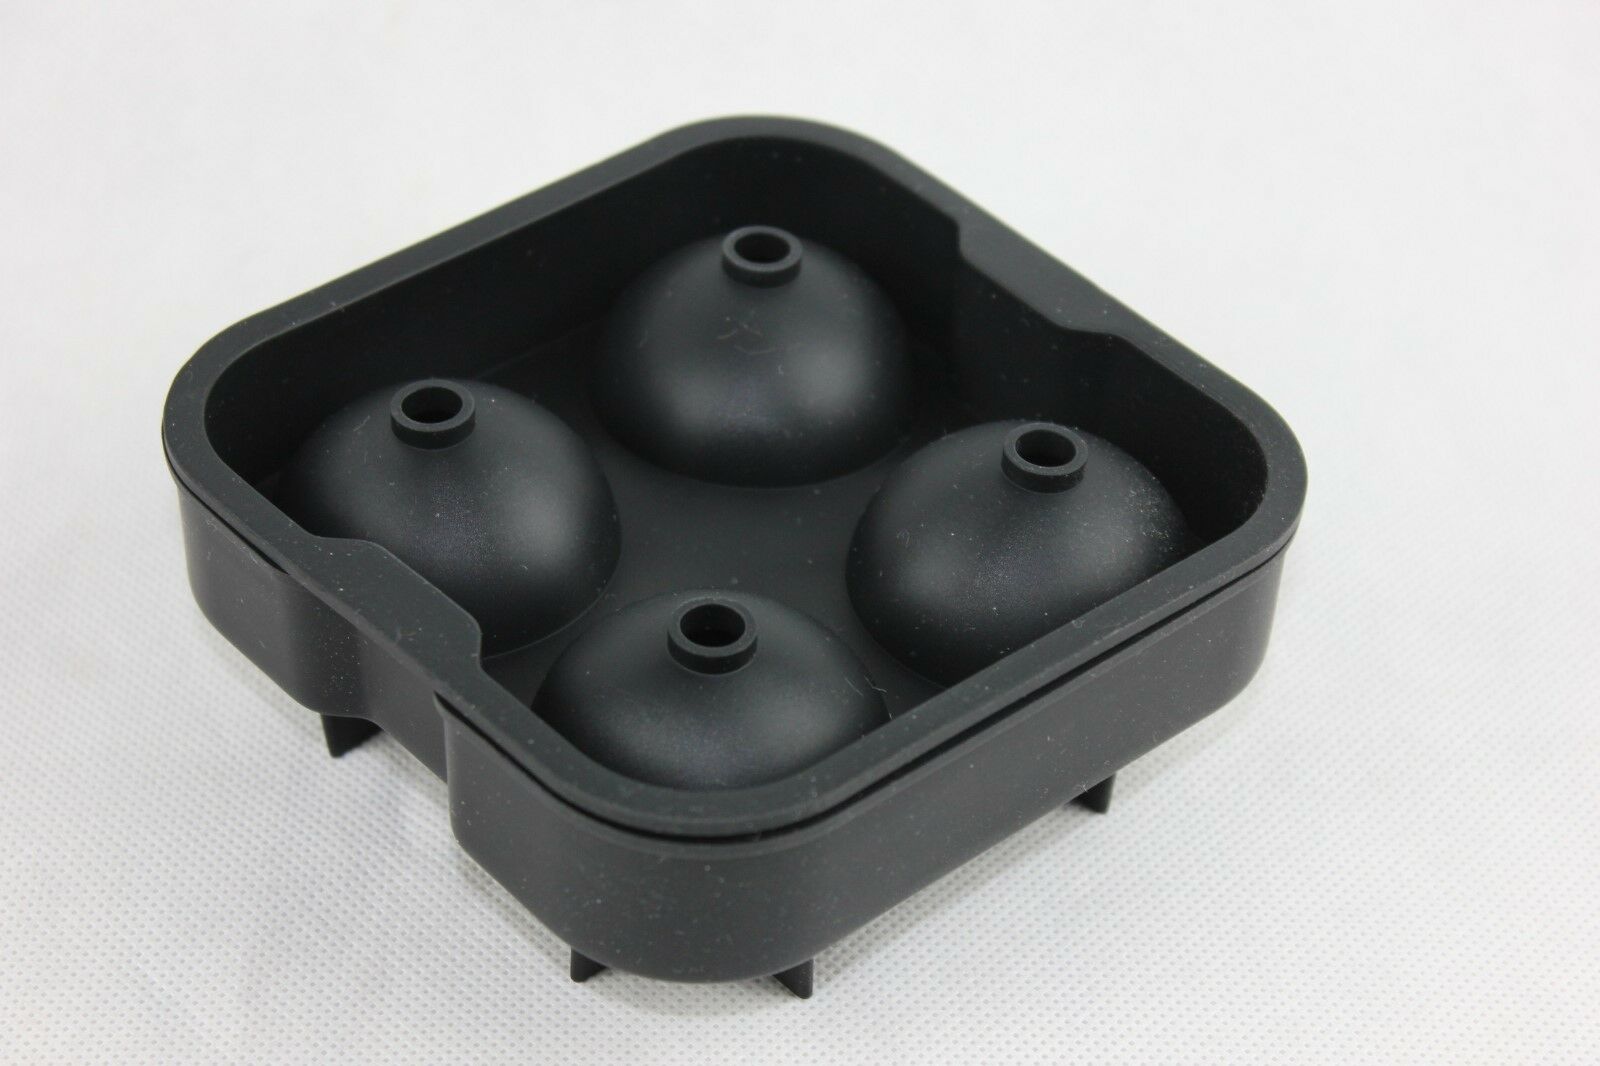 attachment-https://www.cupcakeaddicts.co.uk/wp-content/uploads/imported/6/Large-Round-Ice-Cube-4-Whiskey-Ball-Silicone-Mould-Tray-Sphere-Paperweight-Craft-323163039456-3.jpg